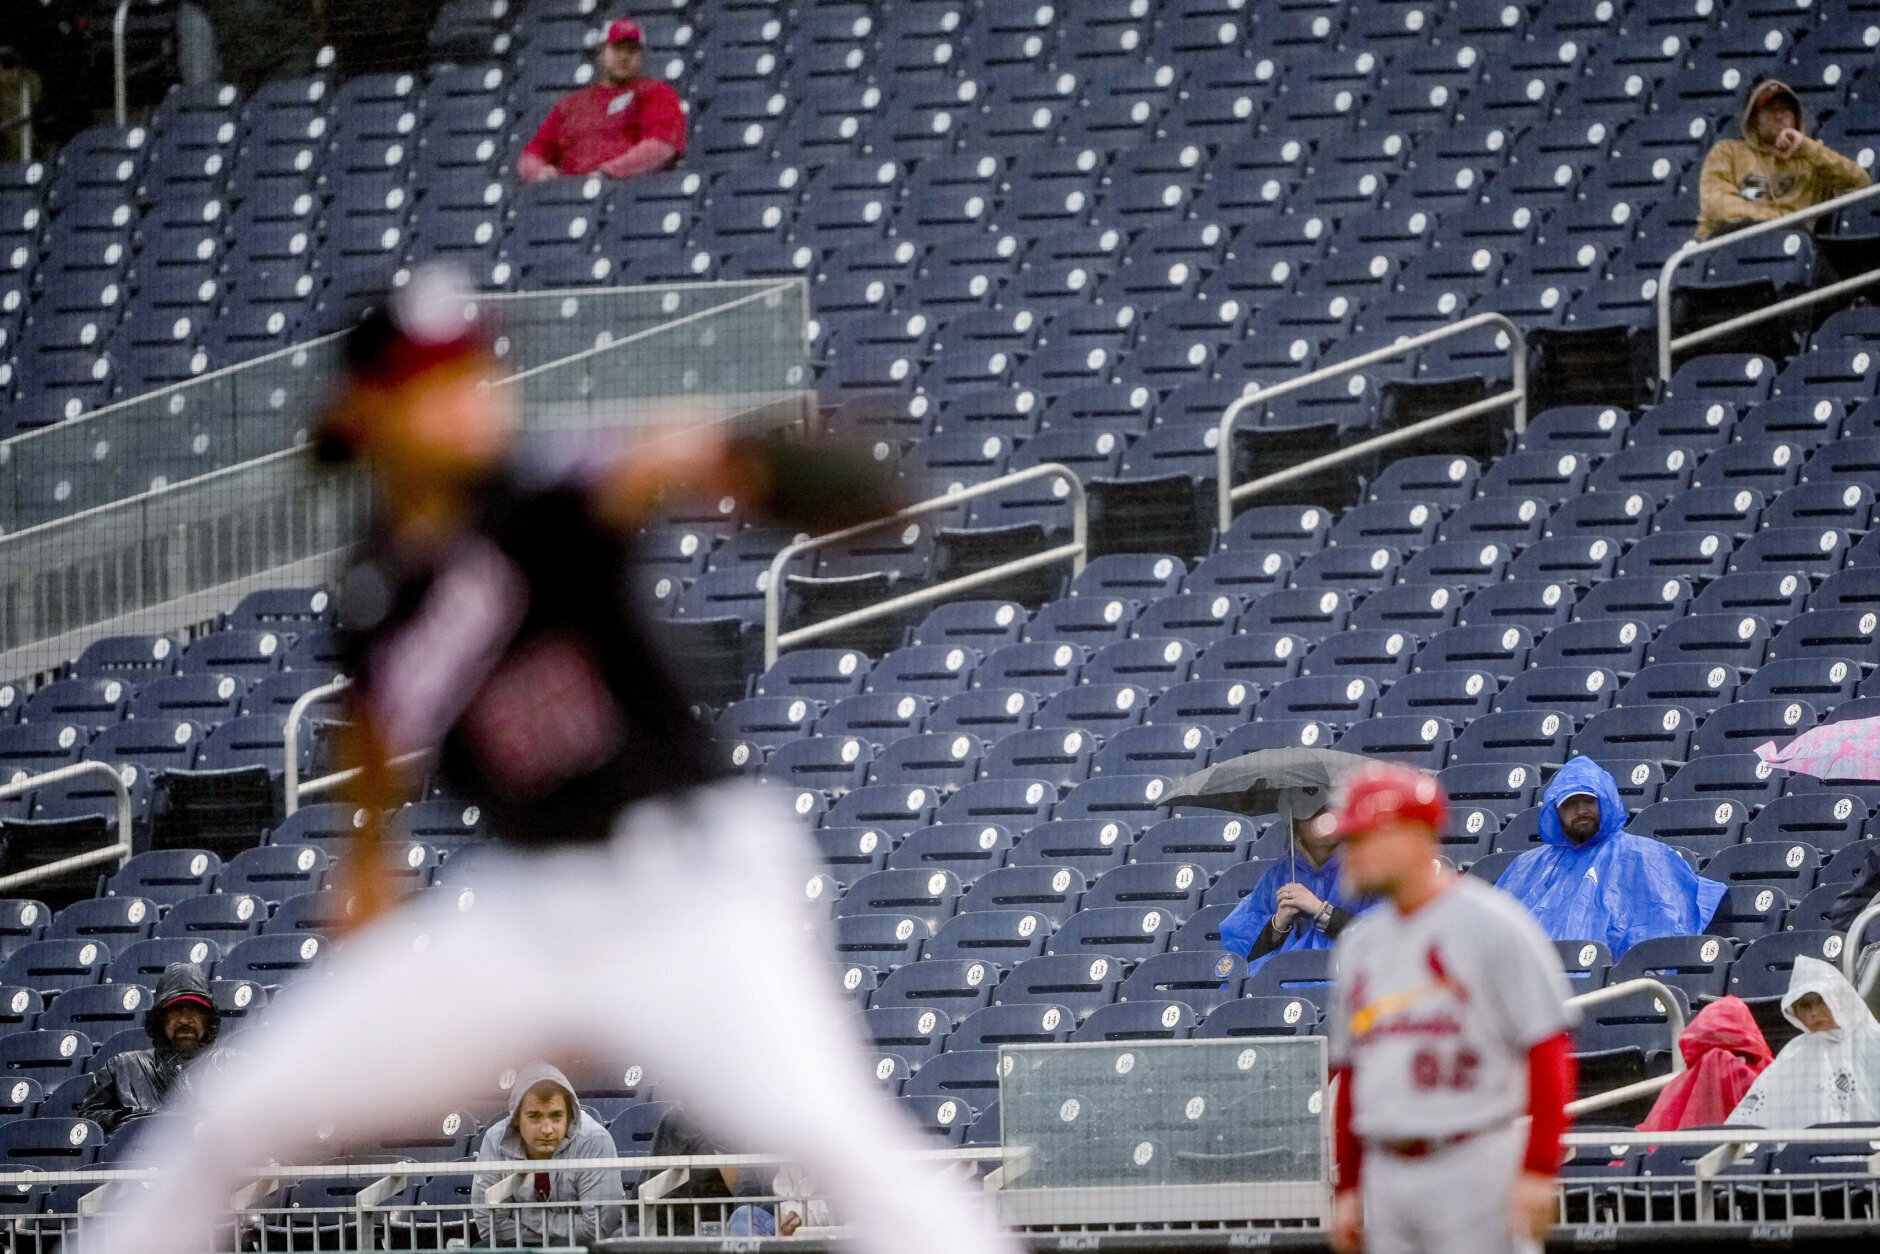 Cardinals-Nationals game suspended due to weather